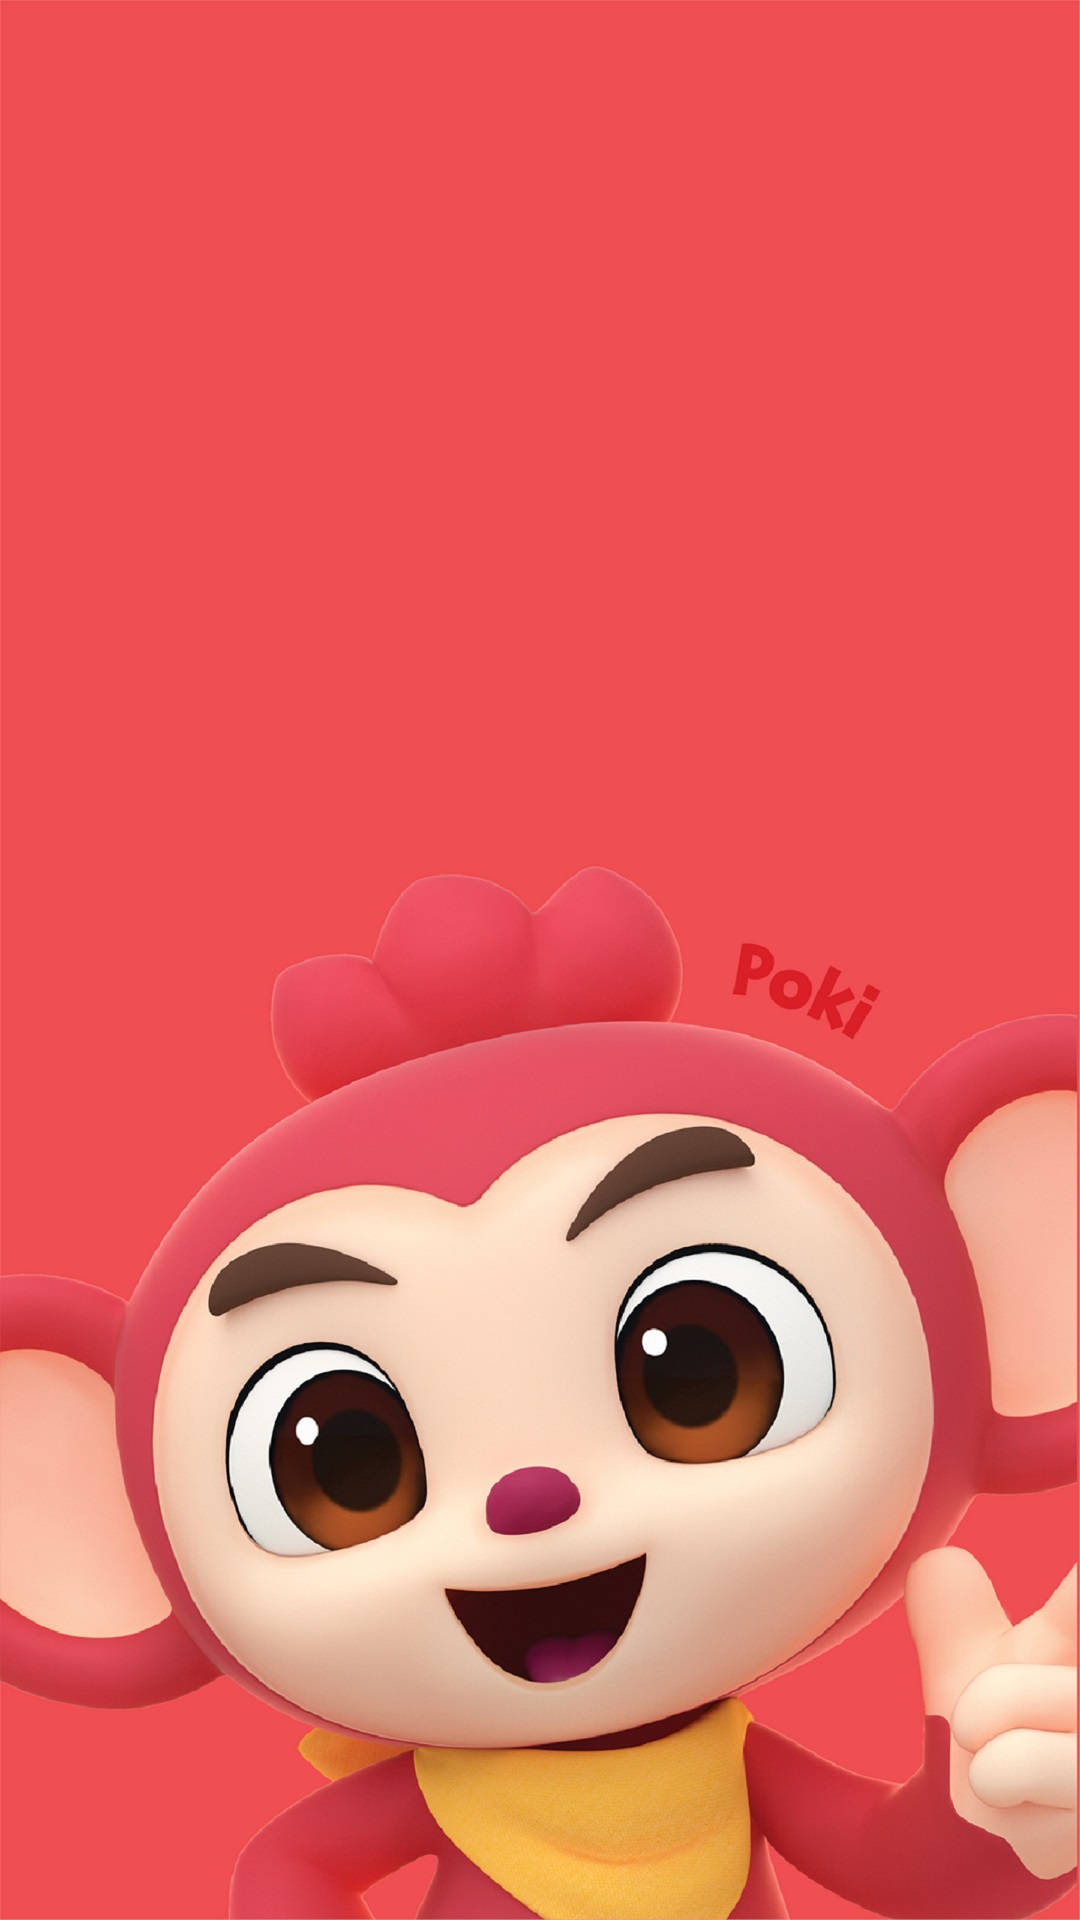 Pinkfong Poki Red Poster